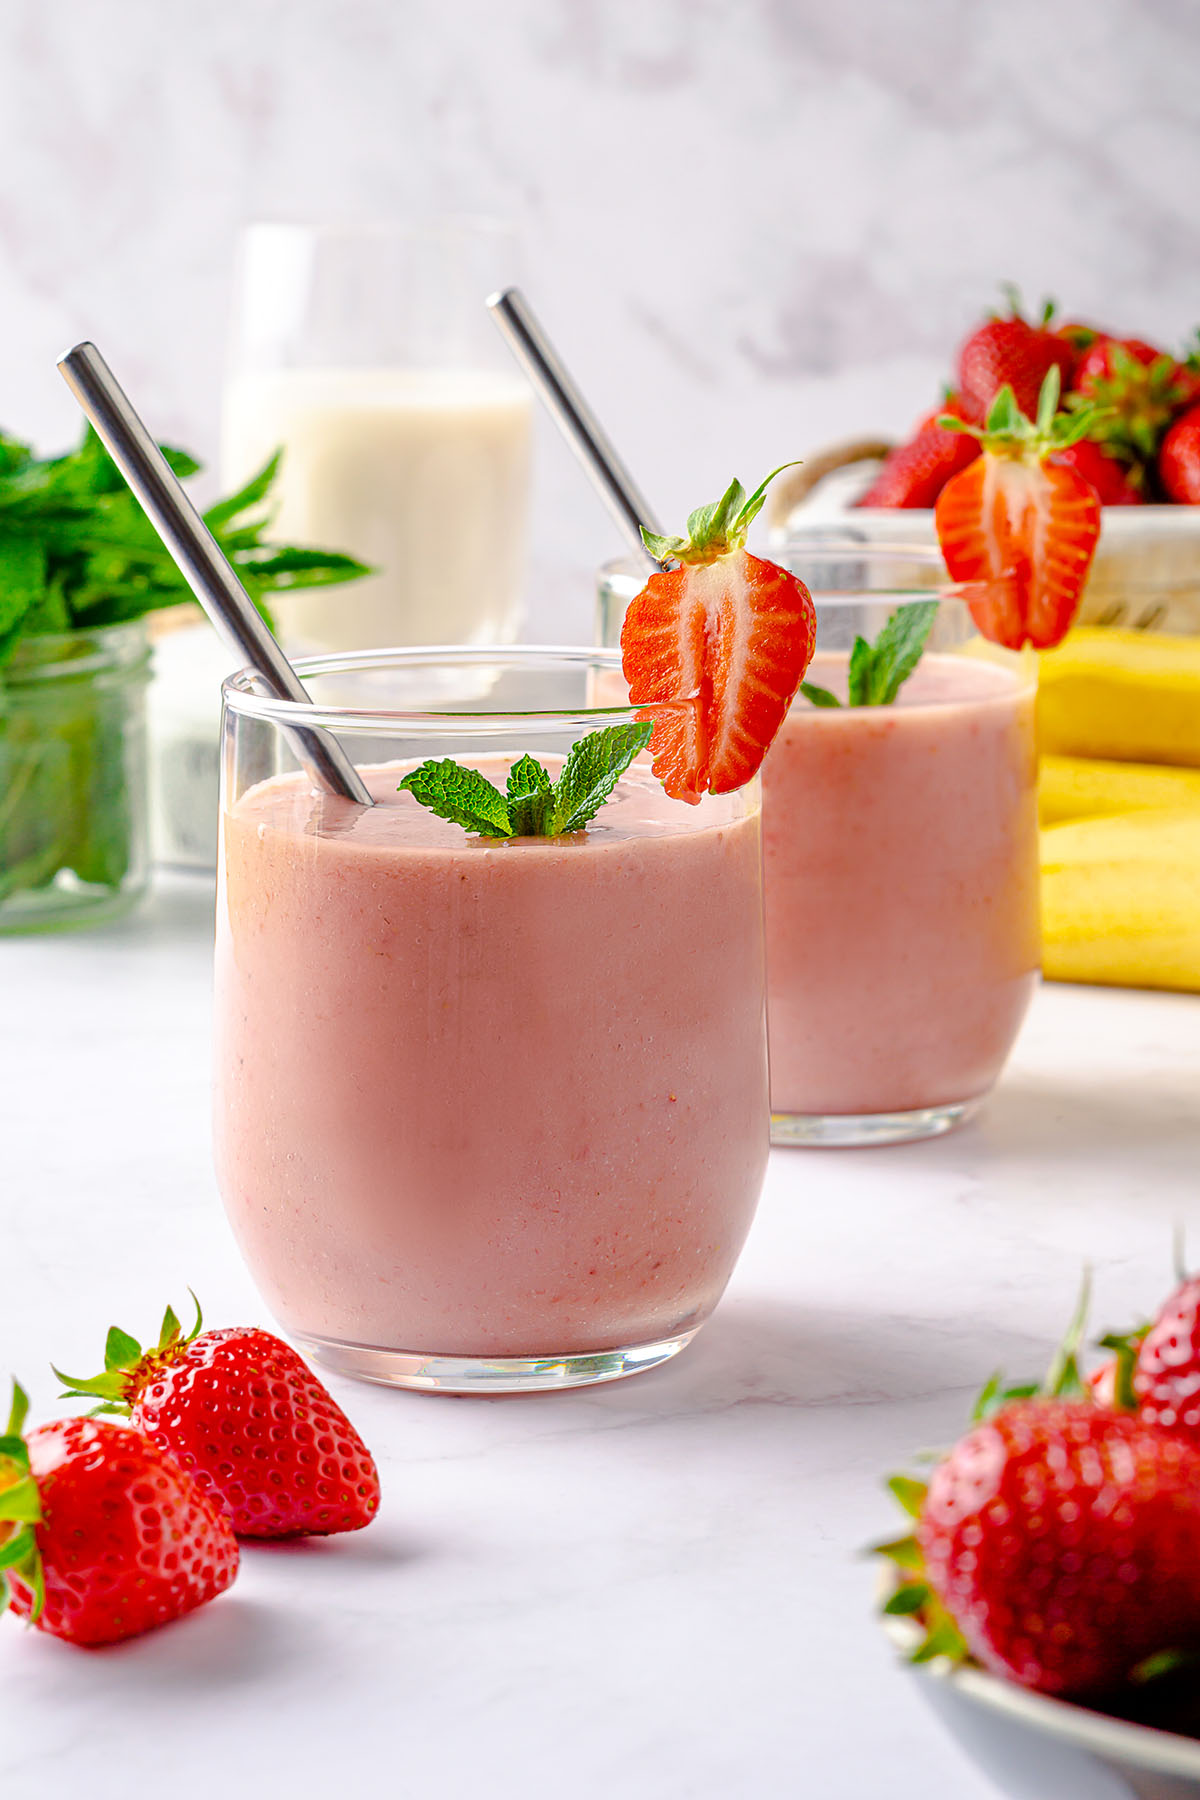 Strawberry banana avocado smoothie in a glass decorated with fresh strawberry